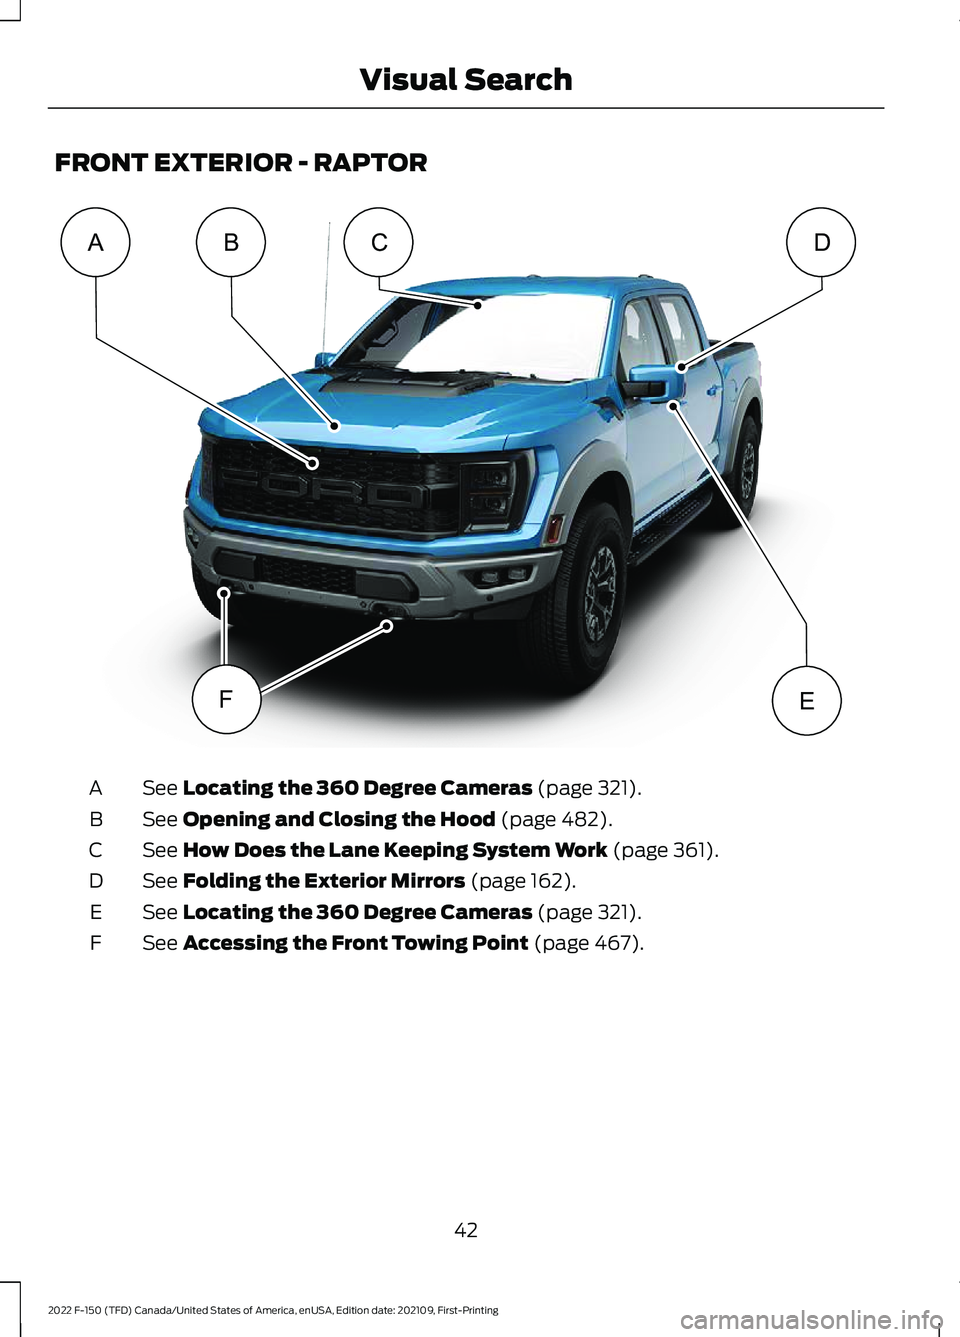 FORD F-150 2022 Service Manual FRONT EXTERIOR - RAPTOR
See Locating the 360 Degree Cameras (page 321).
A
See 
Opening and Closing the Hood (page 482).
B
See 
How Does the Lane Keeping System Work (page 361).
C
See 
Folding the Exte